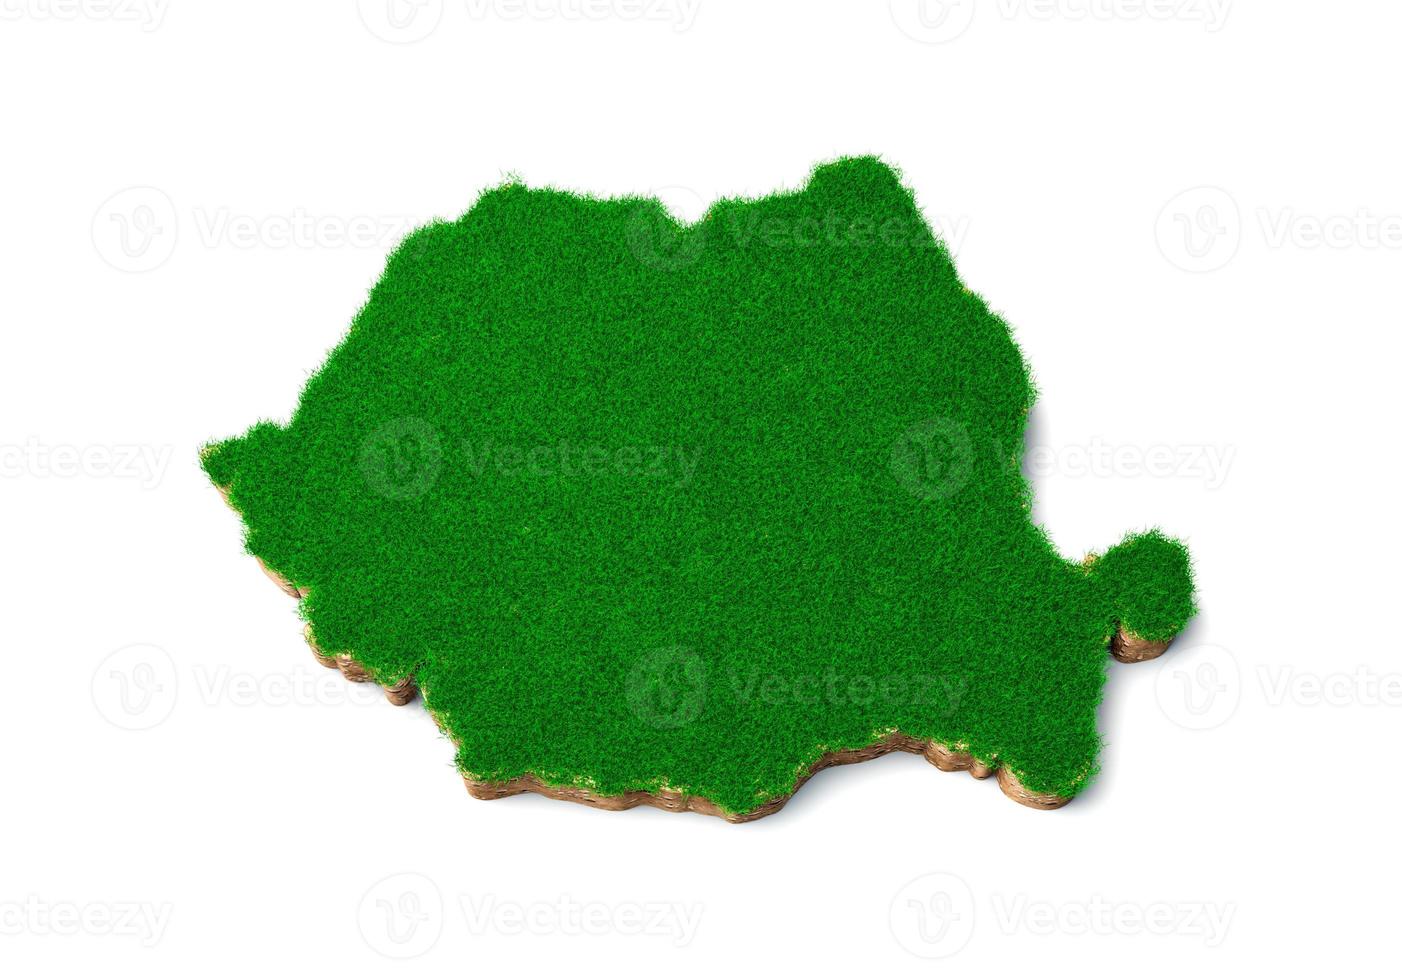 Romania Map soil land geology cross section with green grass and Rock ground texture 3d illustration photo